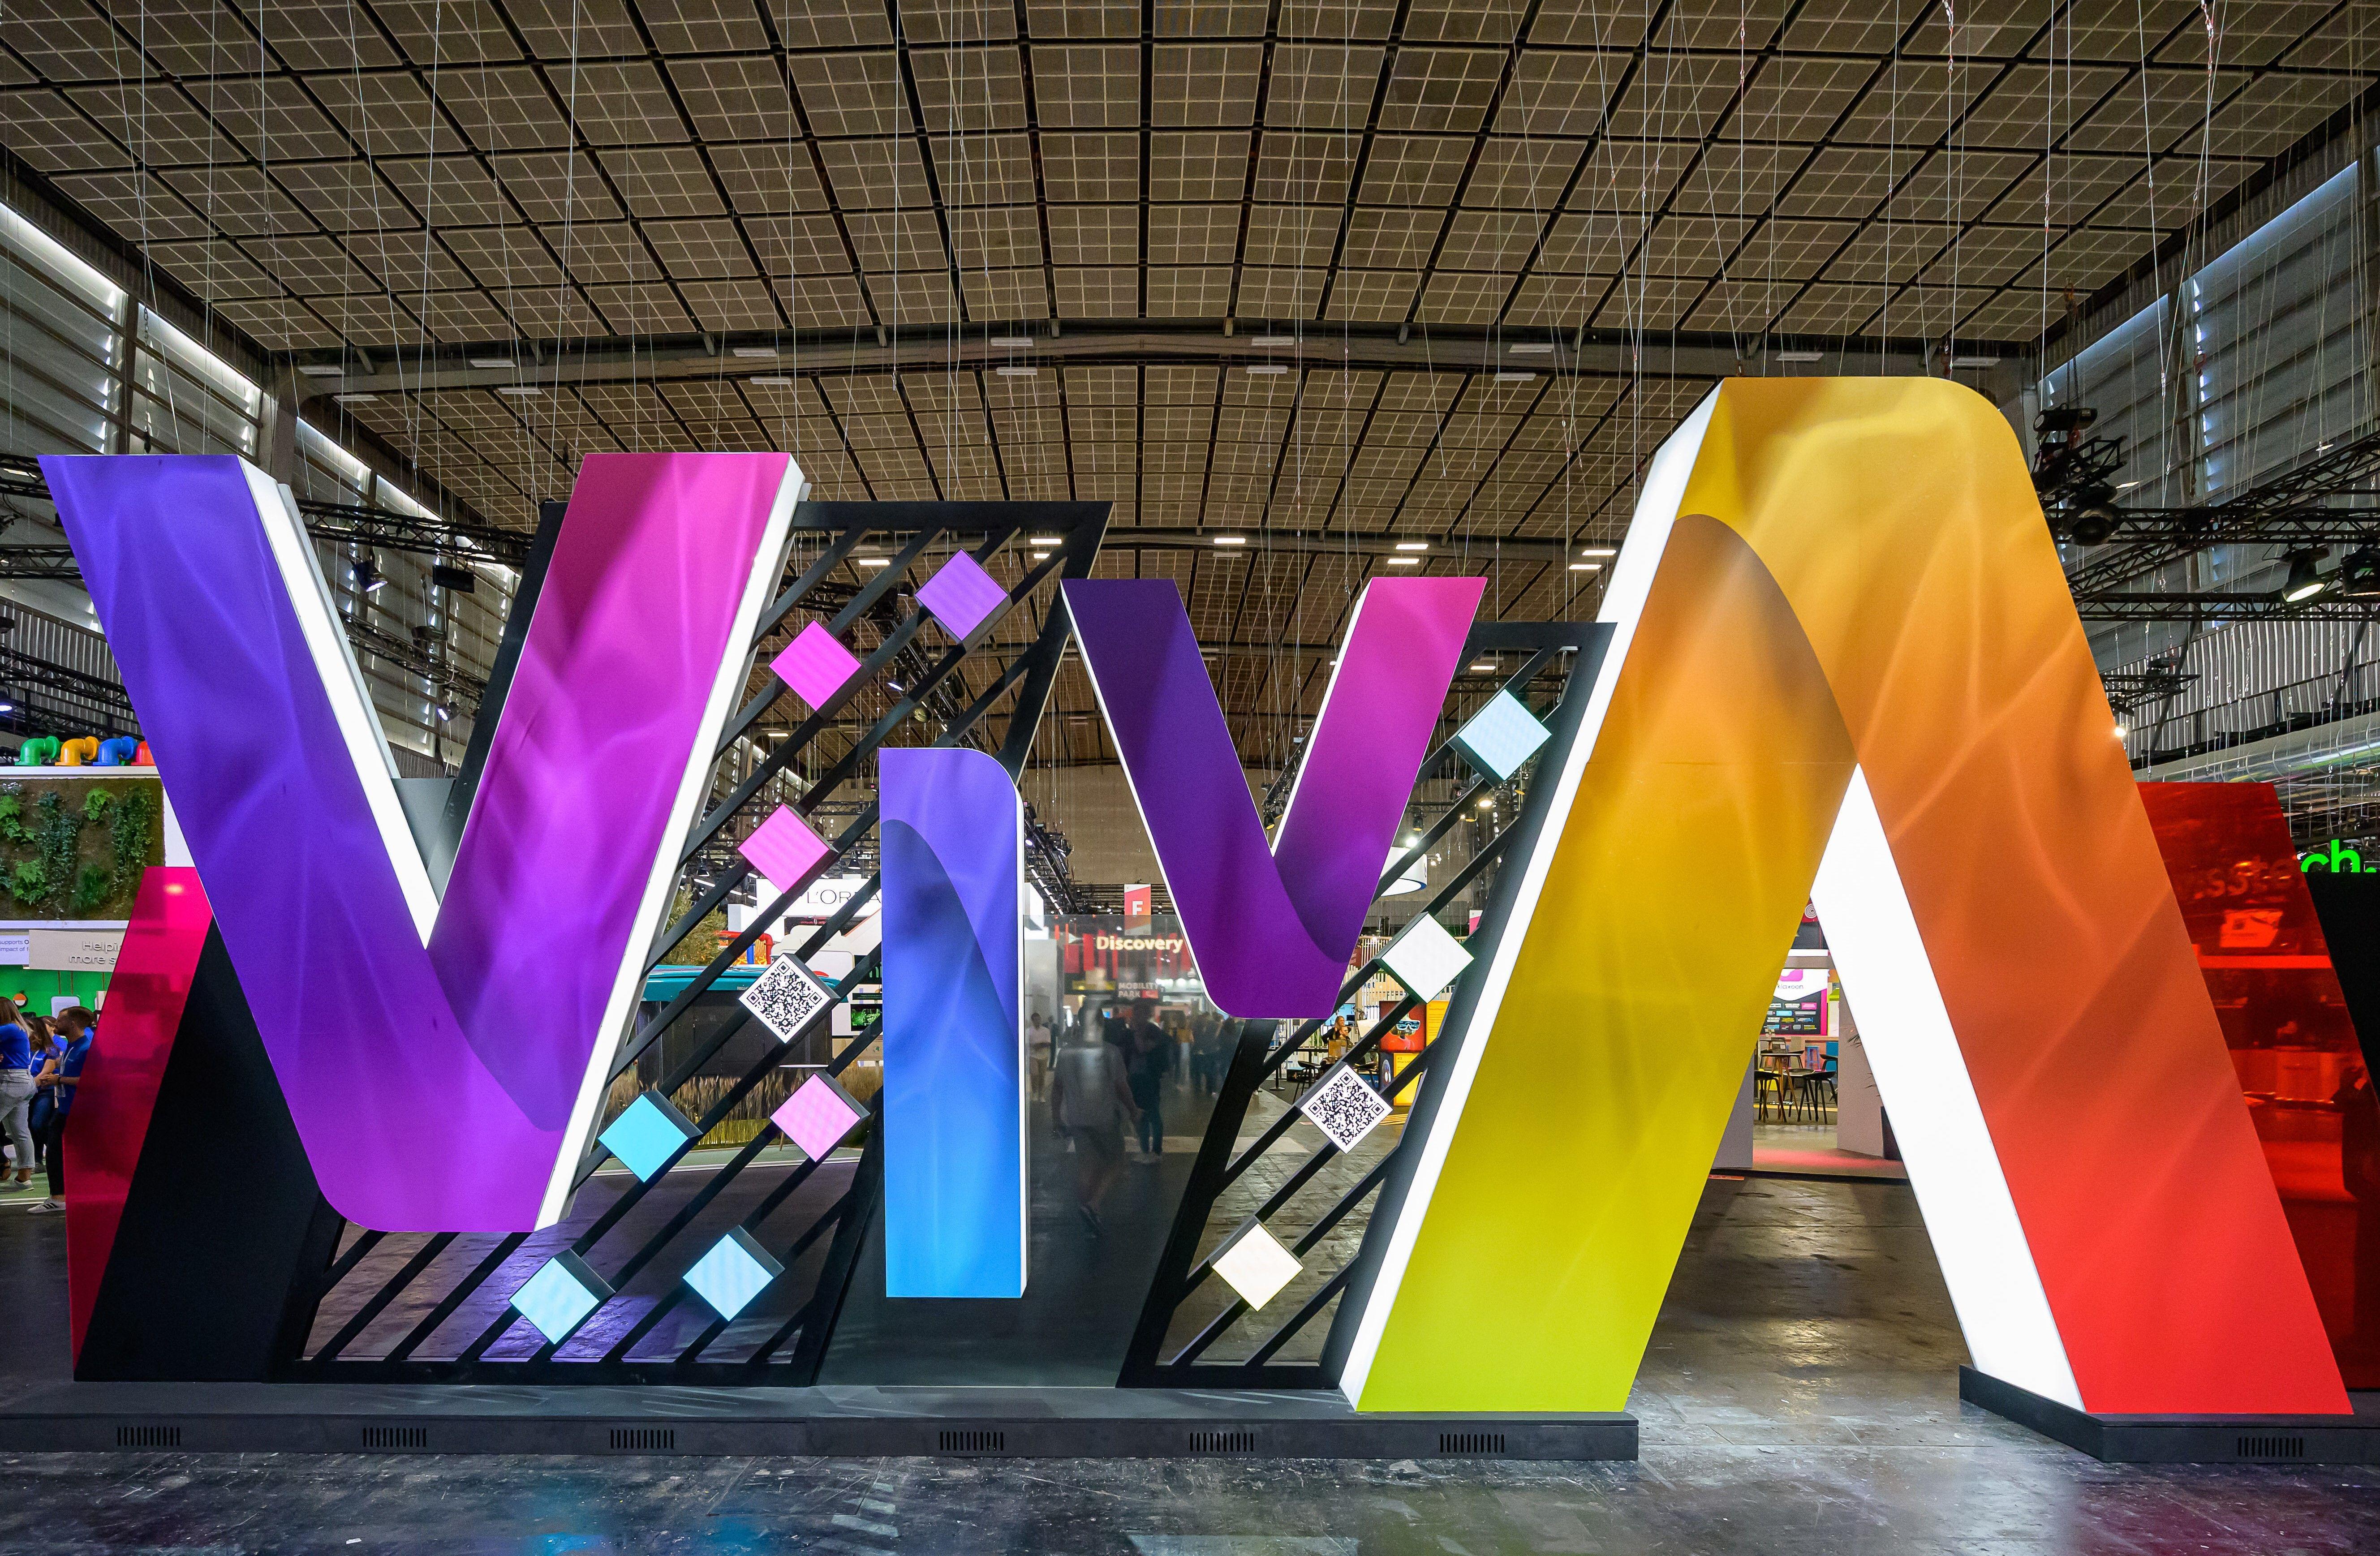 VivaTech, Paris Welcomes Back Europe’s Biggest Technology Startup Event